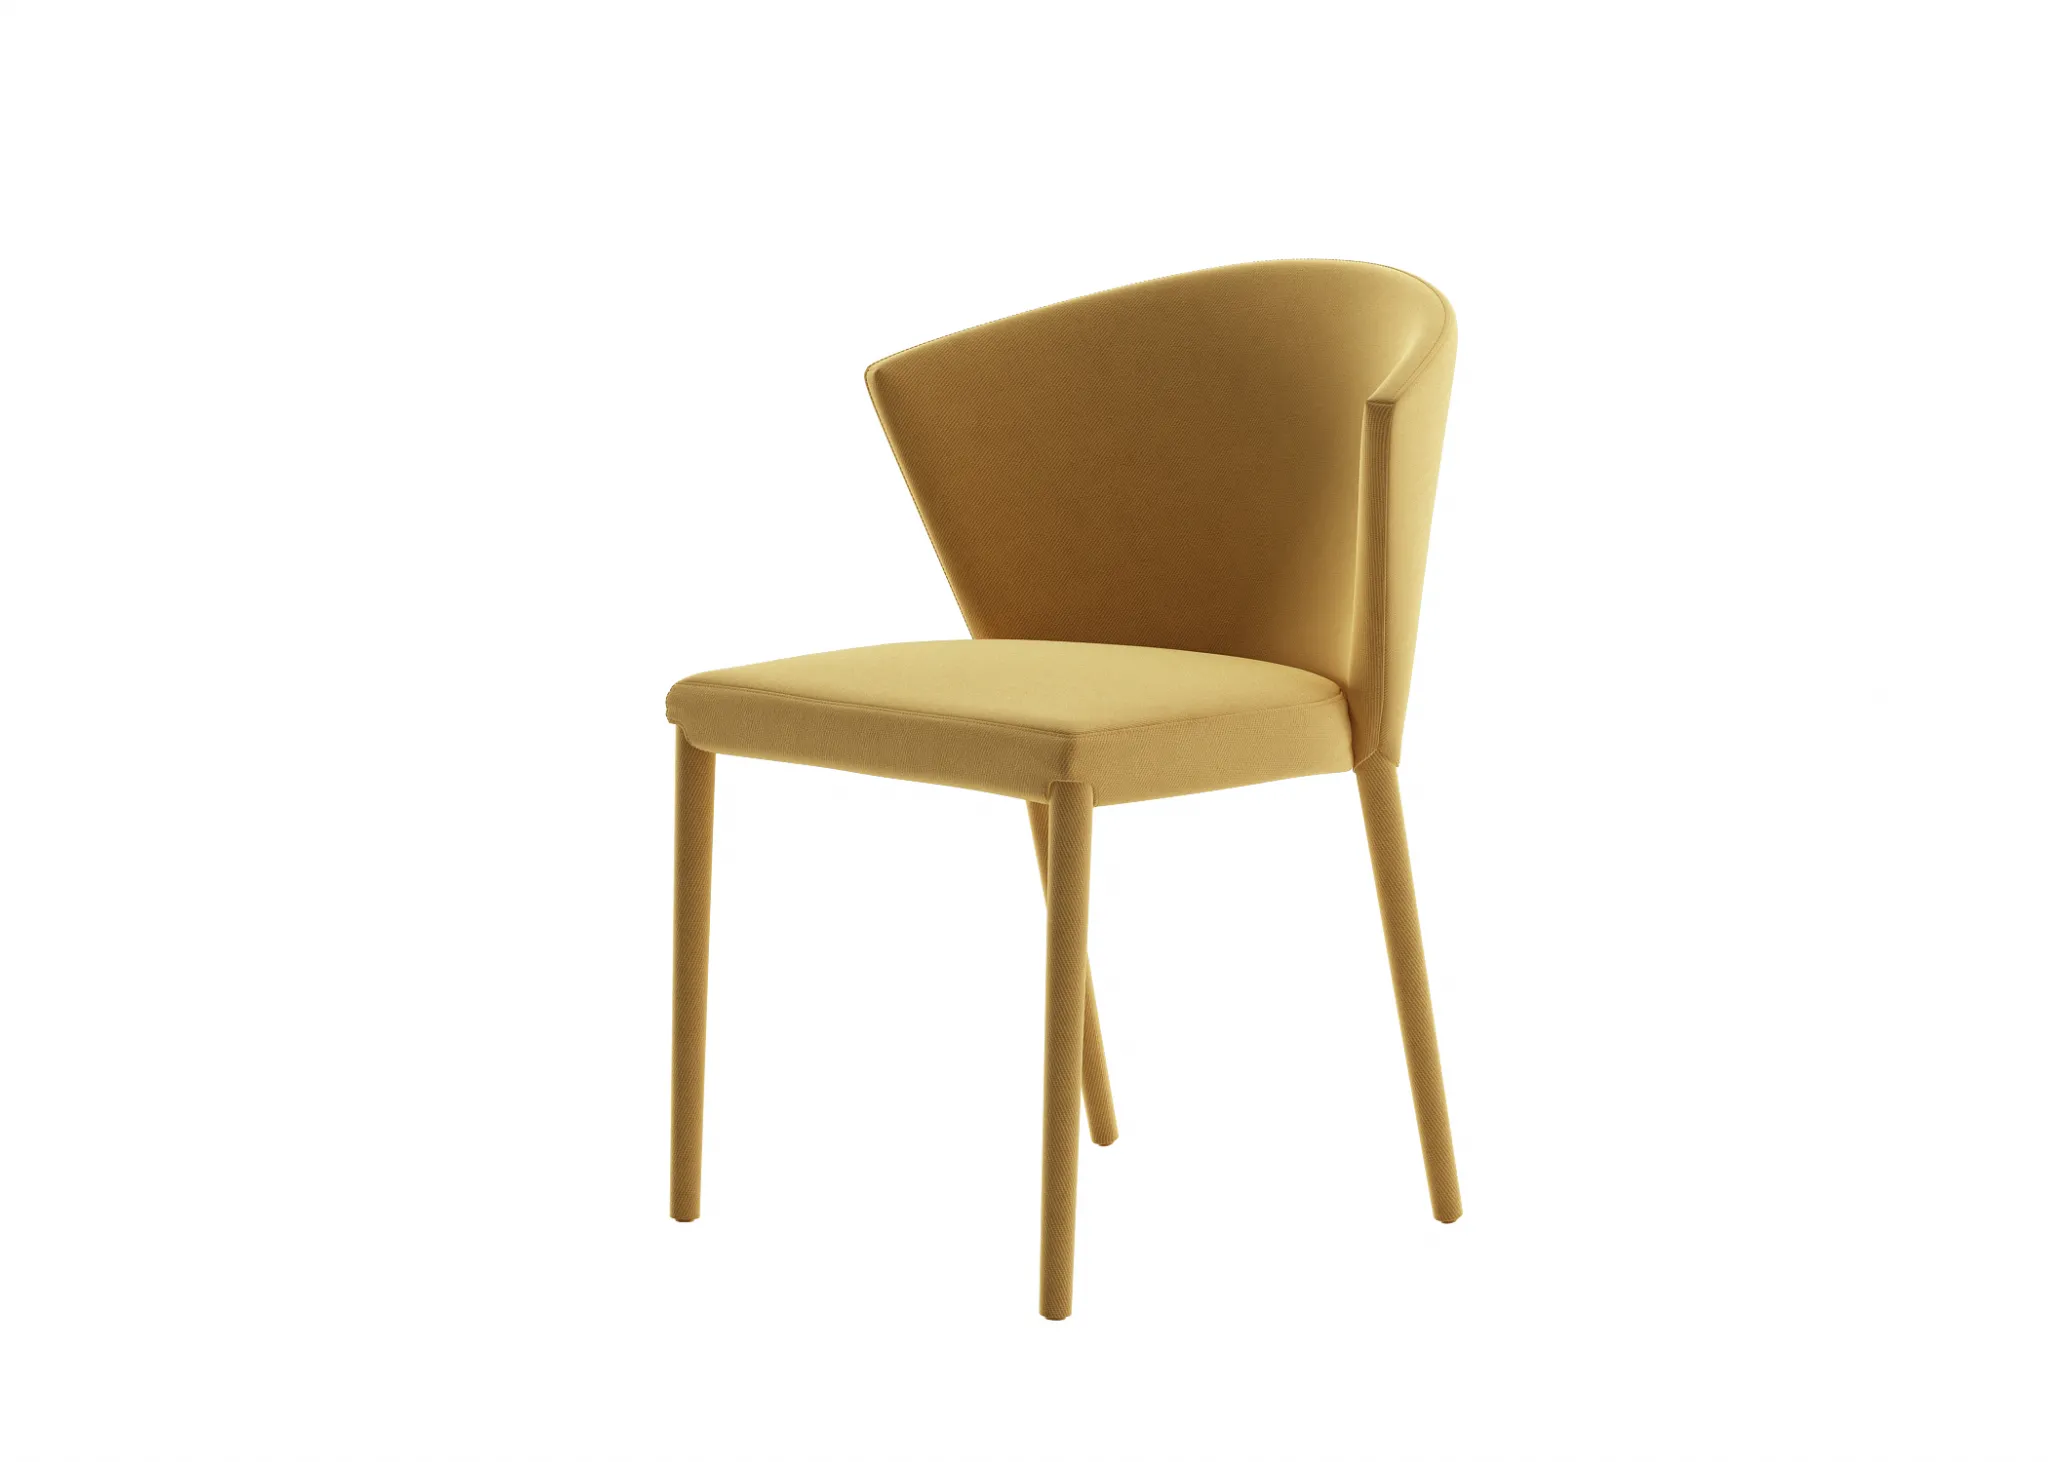 FURNITURE 3D MODELS – CHAIRS – 0324